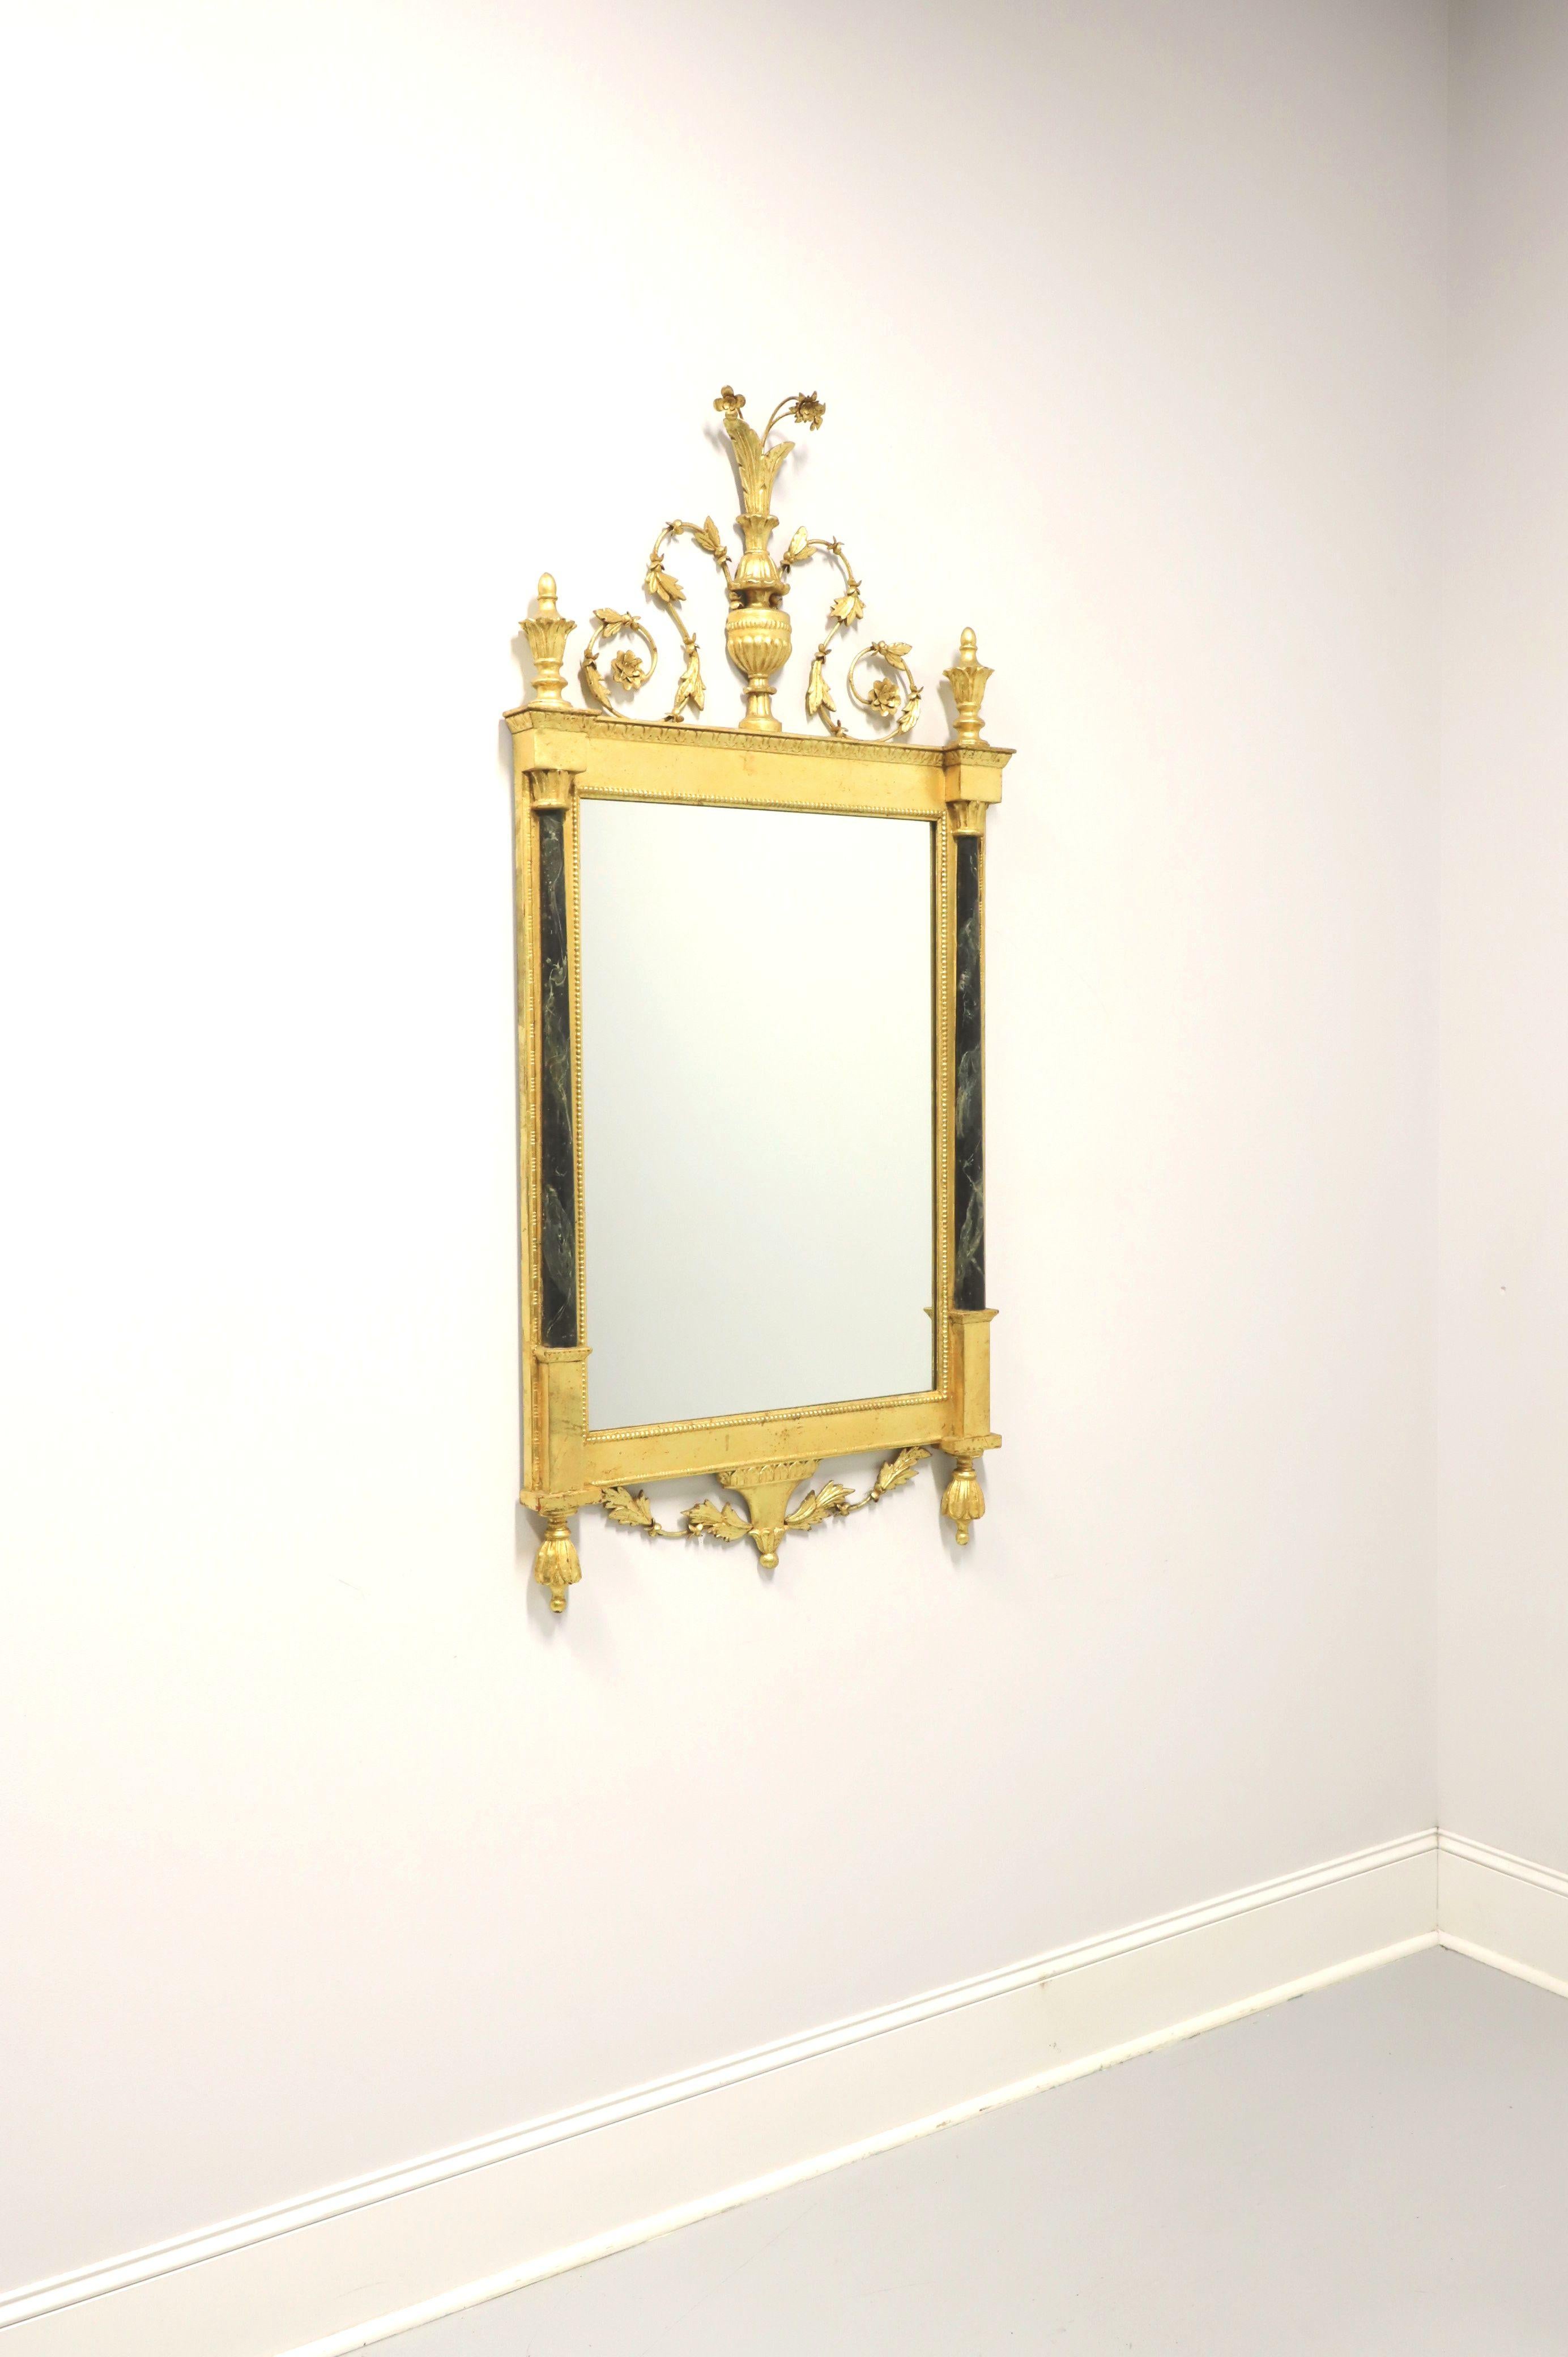 A Neoclassical style wall mirror, unbranded. Mirror glass in an ornate gold gilt wood frame with metal & wood foliate ornamentation and black marbleized side columns. Likely made in the USA, in the mid 20th century.

Measures: 28.75 W 3 D 59.5 H,